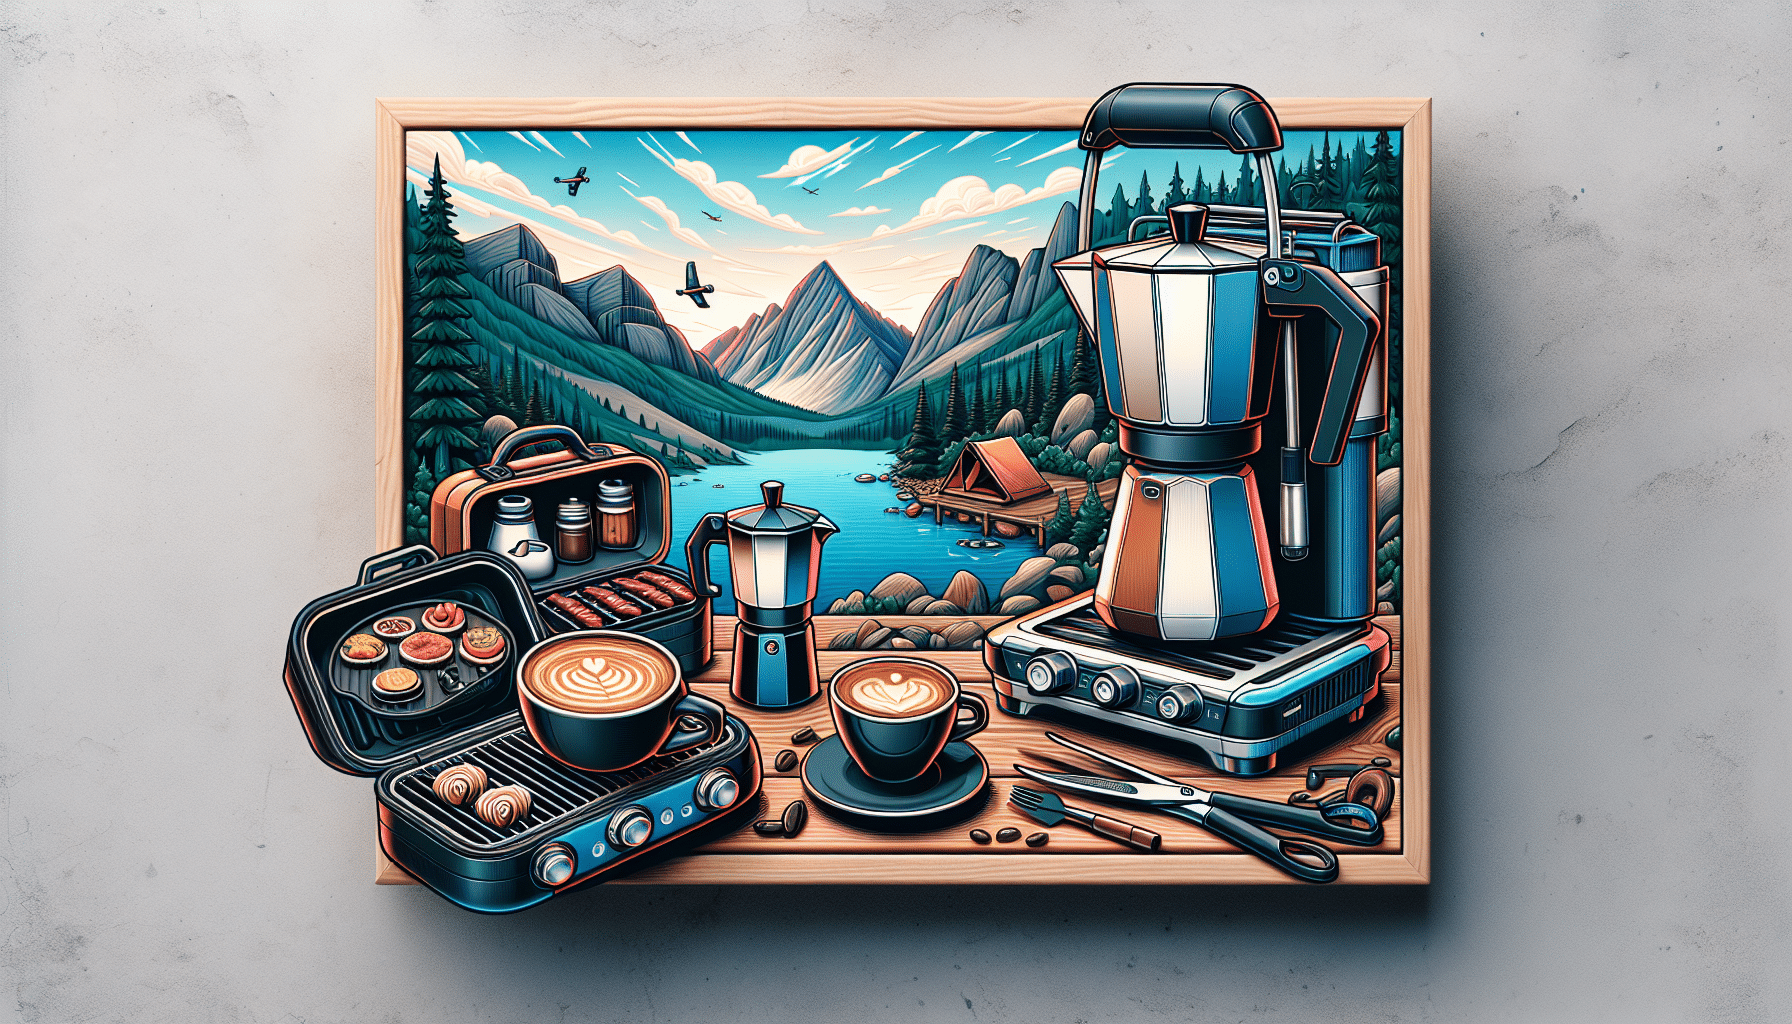 compact and portable espresso machine and mini barbecue, the perfect gear for adventure enthusiasts. enjoy great coffee and delicious grilled food while on the go.